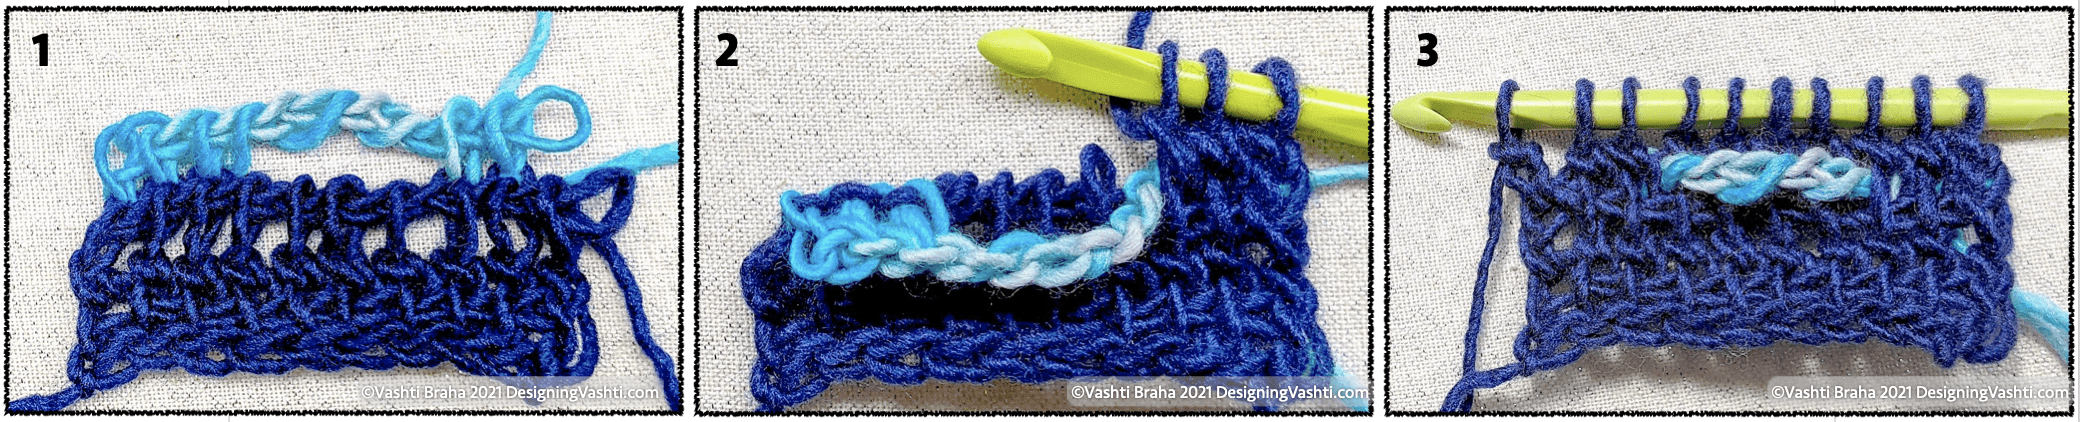 Step 1, what the contrast-colored row of TYO across 4 stitches looks like; step 2, crocheting the next row in front of some stitches to push the contrast color to the back, then fold the TYO group down to the front to crochet into the skipped 4 stitches behind it; step 3, how it looks once the row is completed.